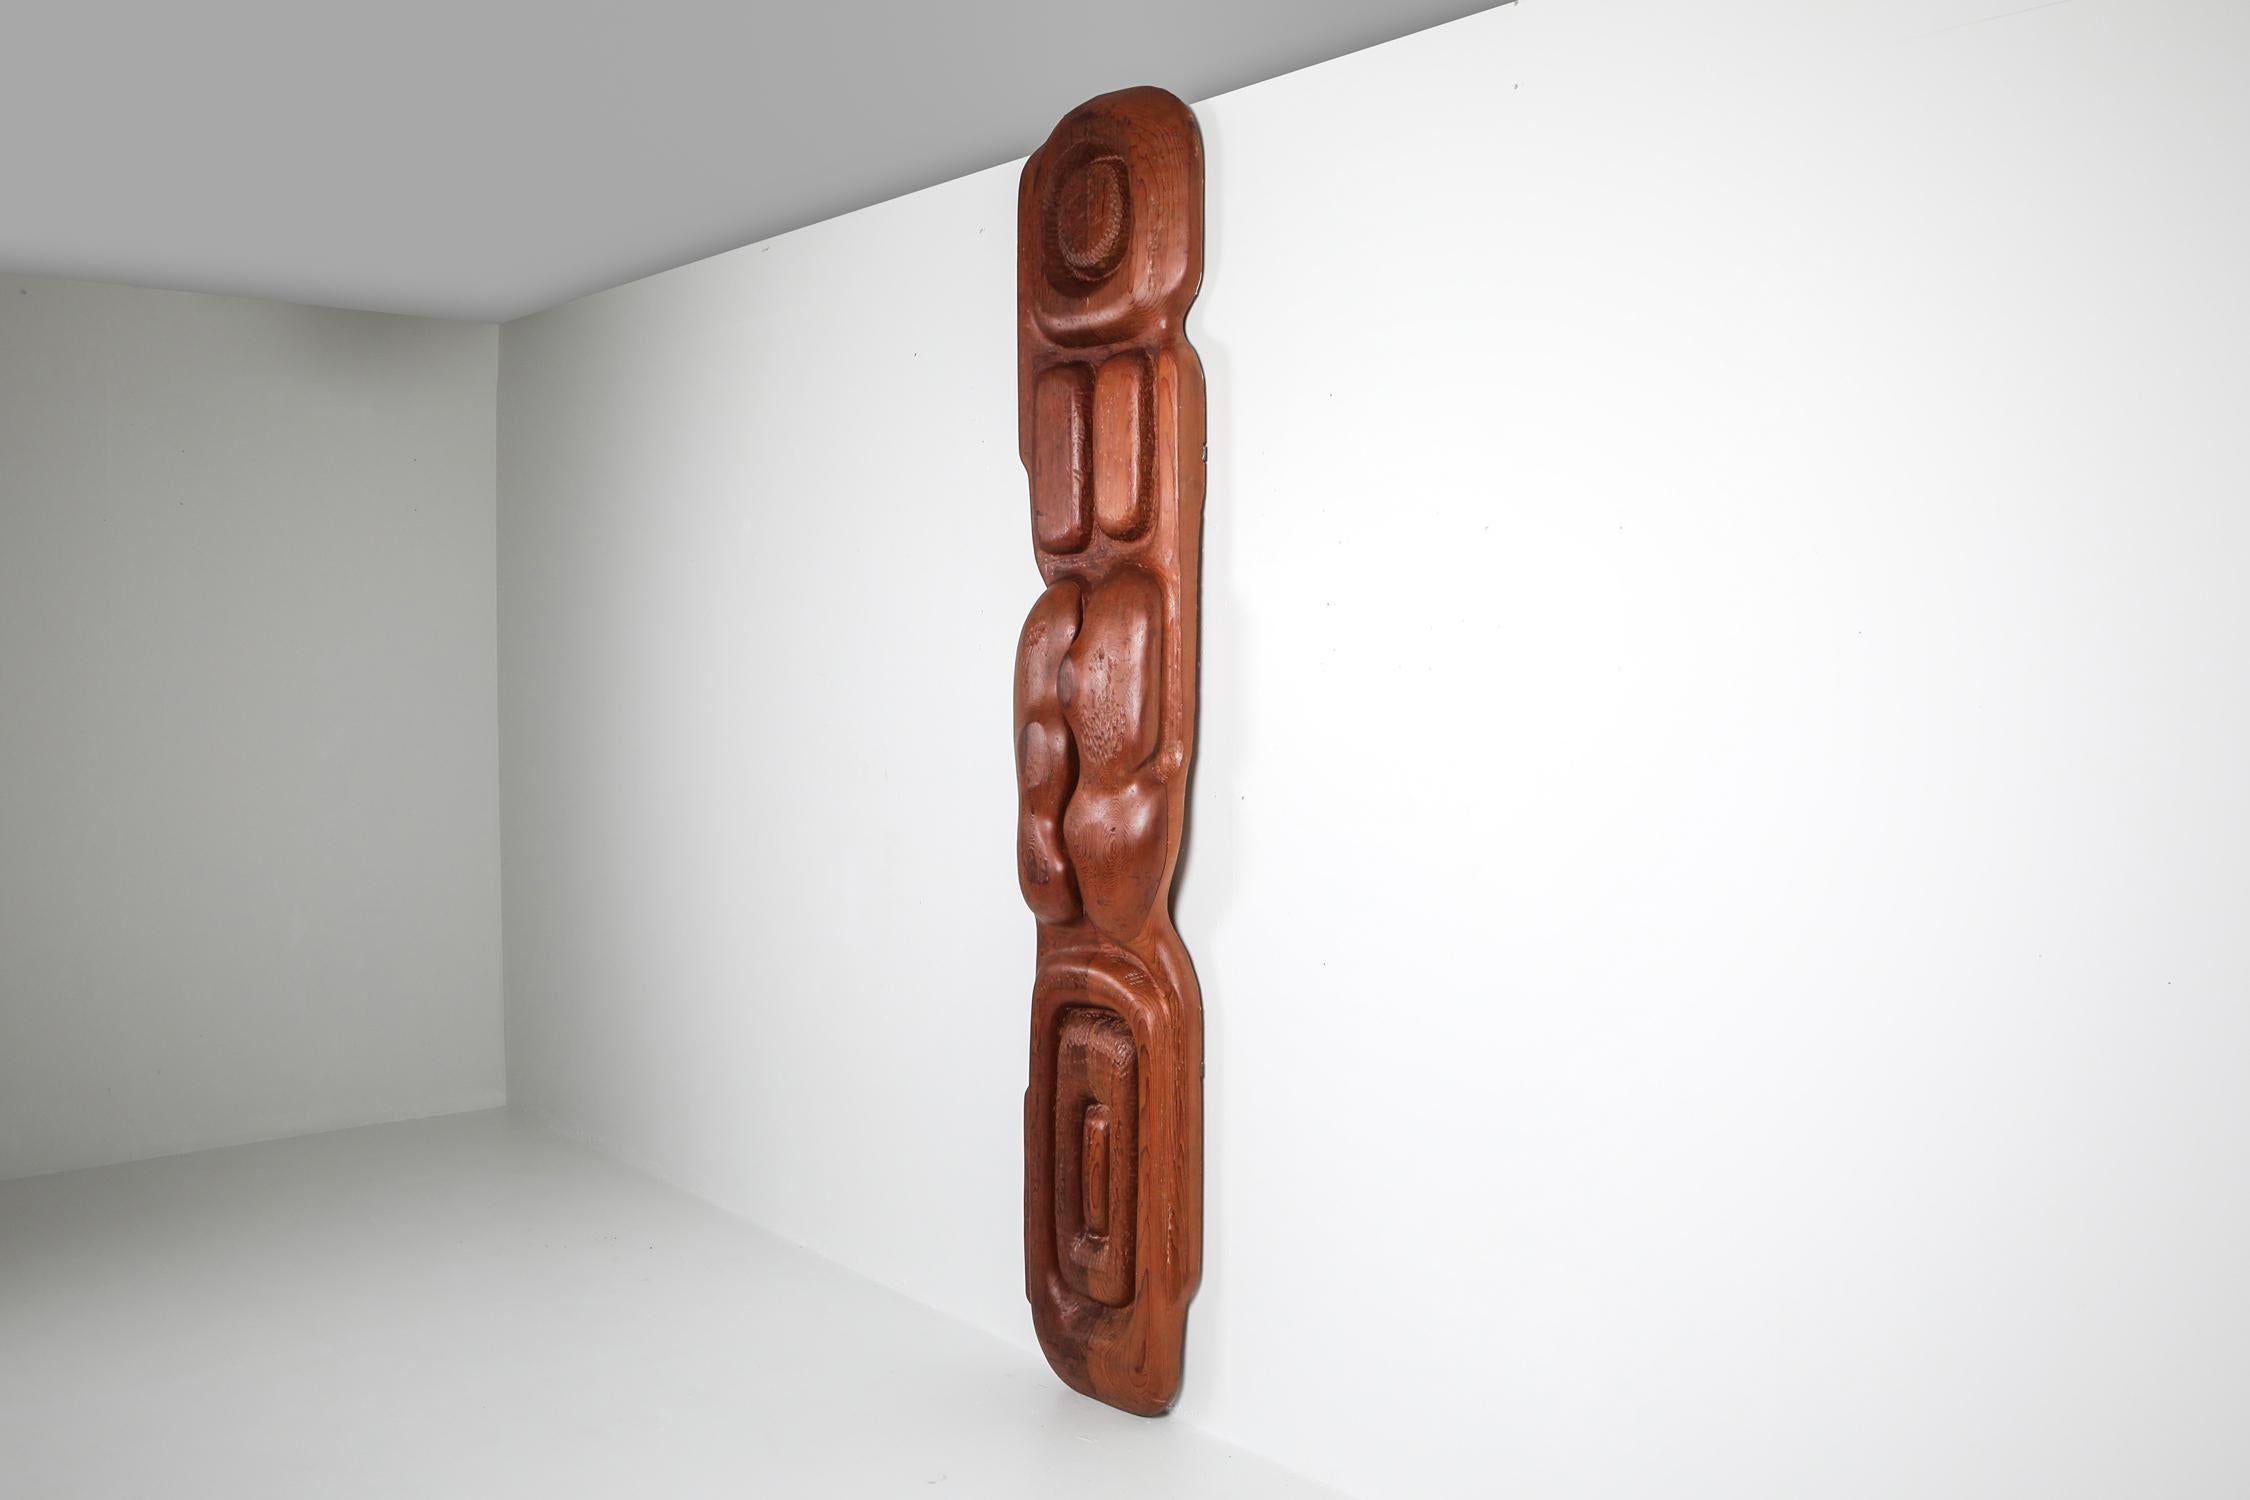 Sculpture, hand carved, tall TOTEM, Netherlands, circa 1960

Organic sculpture from the 1960s, sourced in The Netherlands
The sculpture merges two different woods together.
Could be interpreted as male and female bonding together.
Provenance: